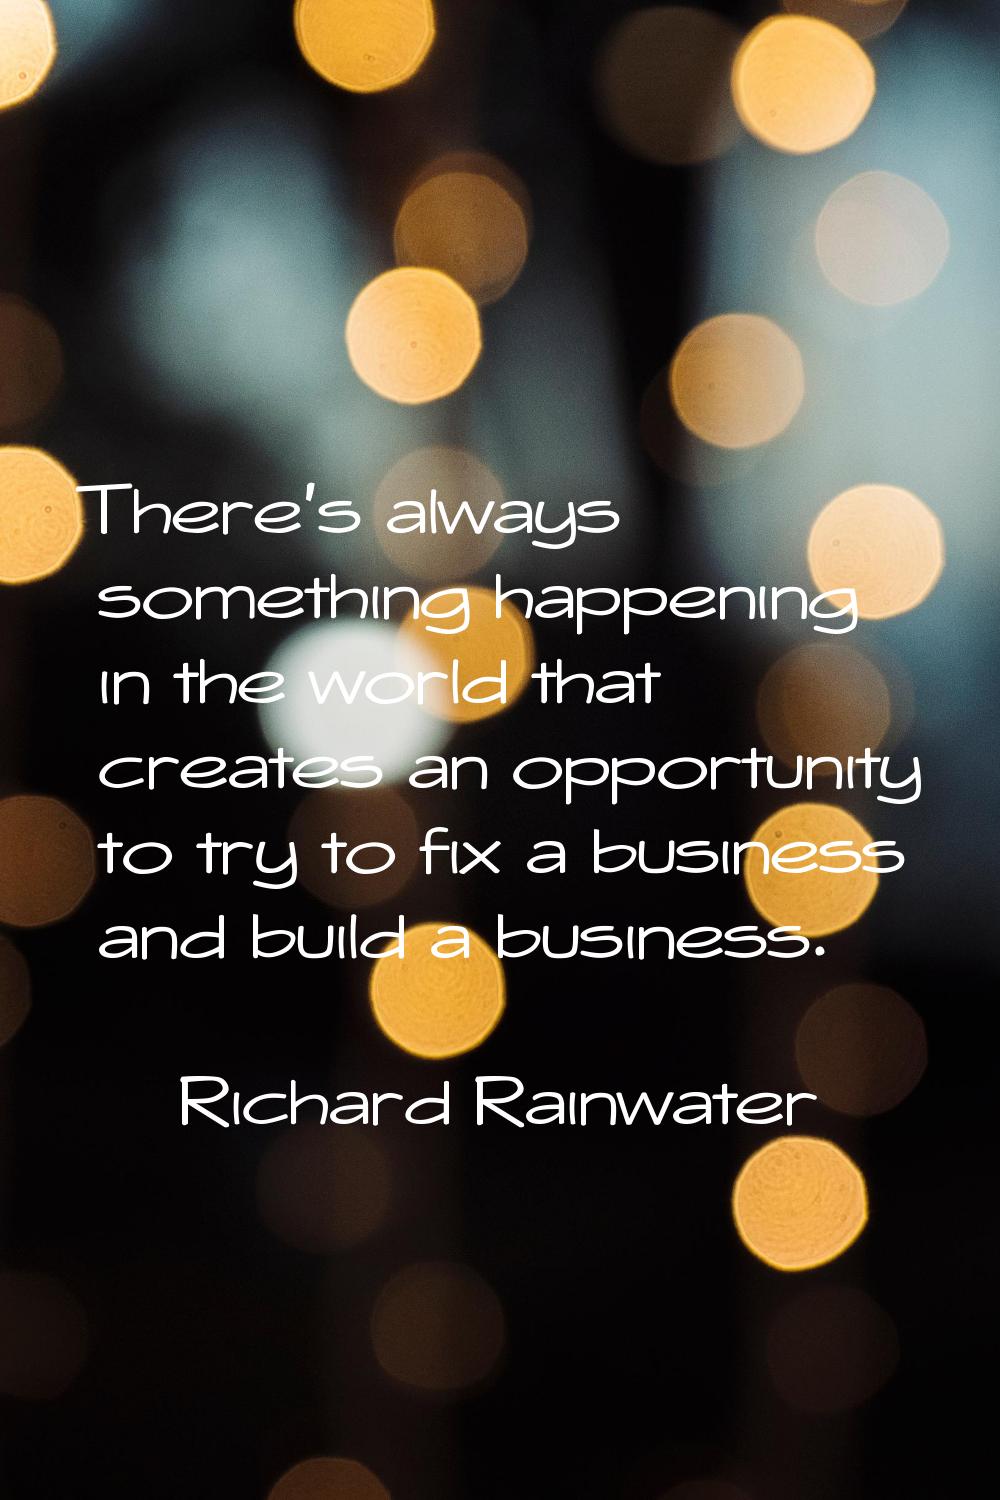 There's always something happening in the world that creates an opportunity to try to fix a busines